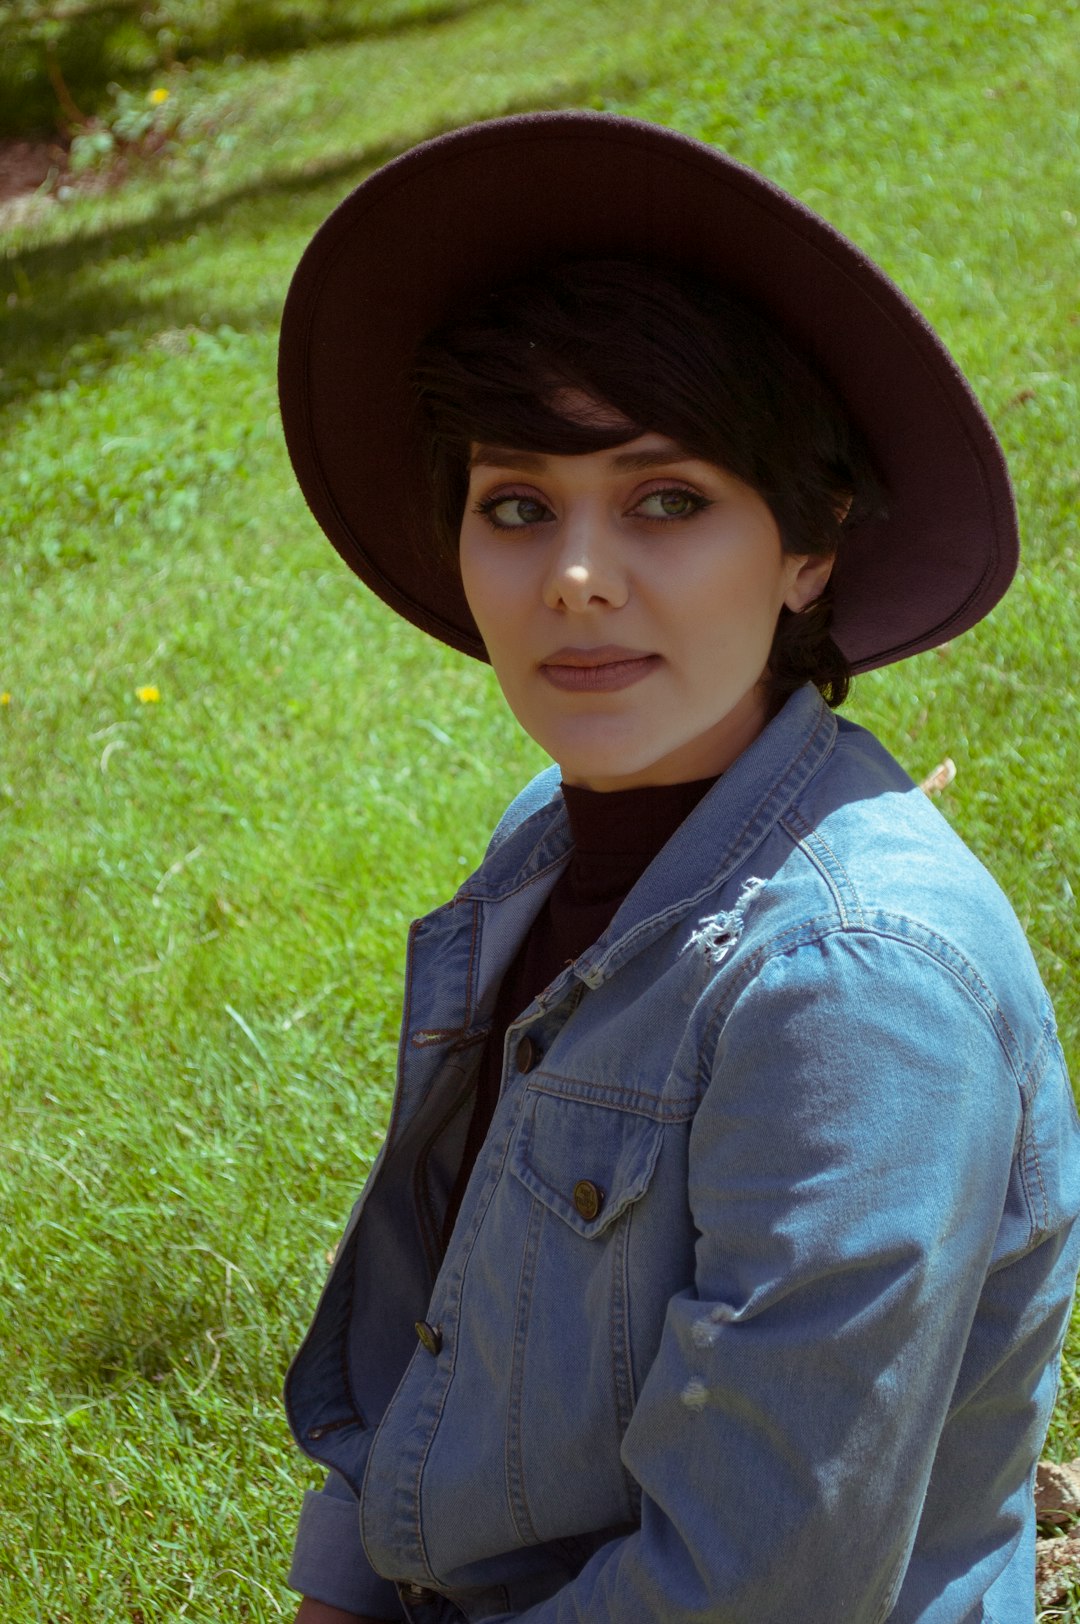 girl in blue denim jacket and brown hat sitting on green grass field during daytime